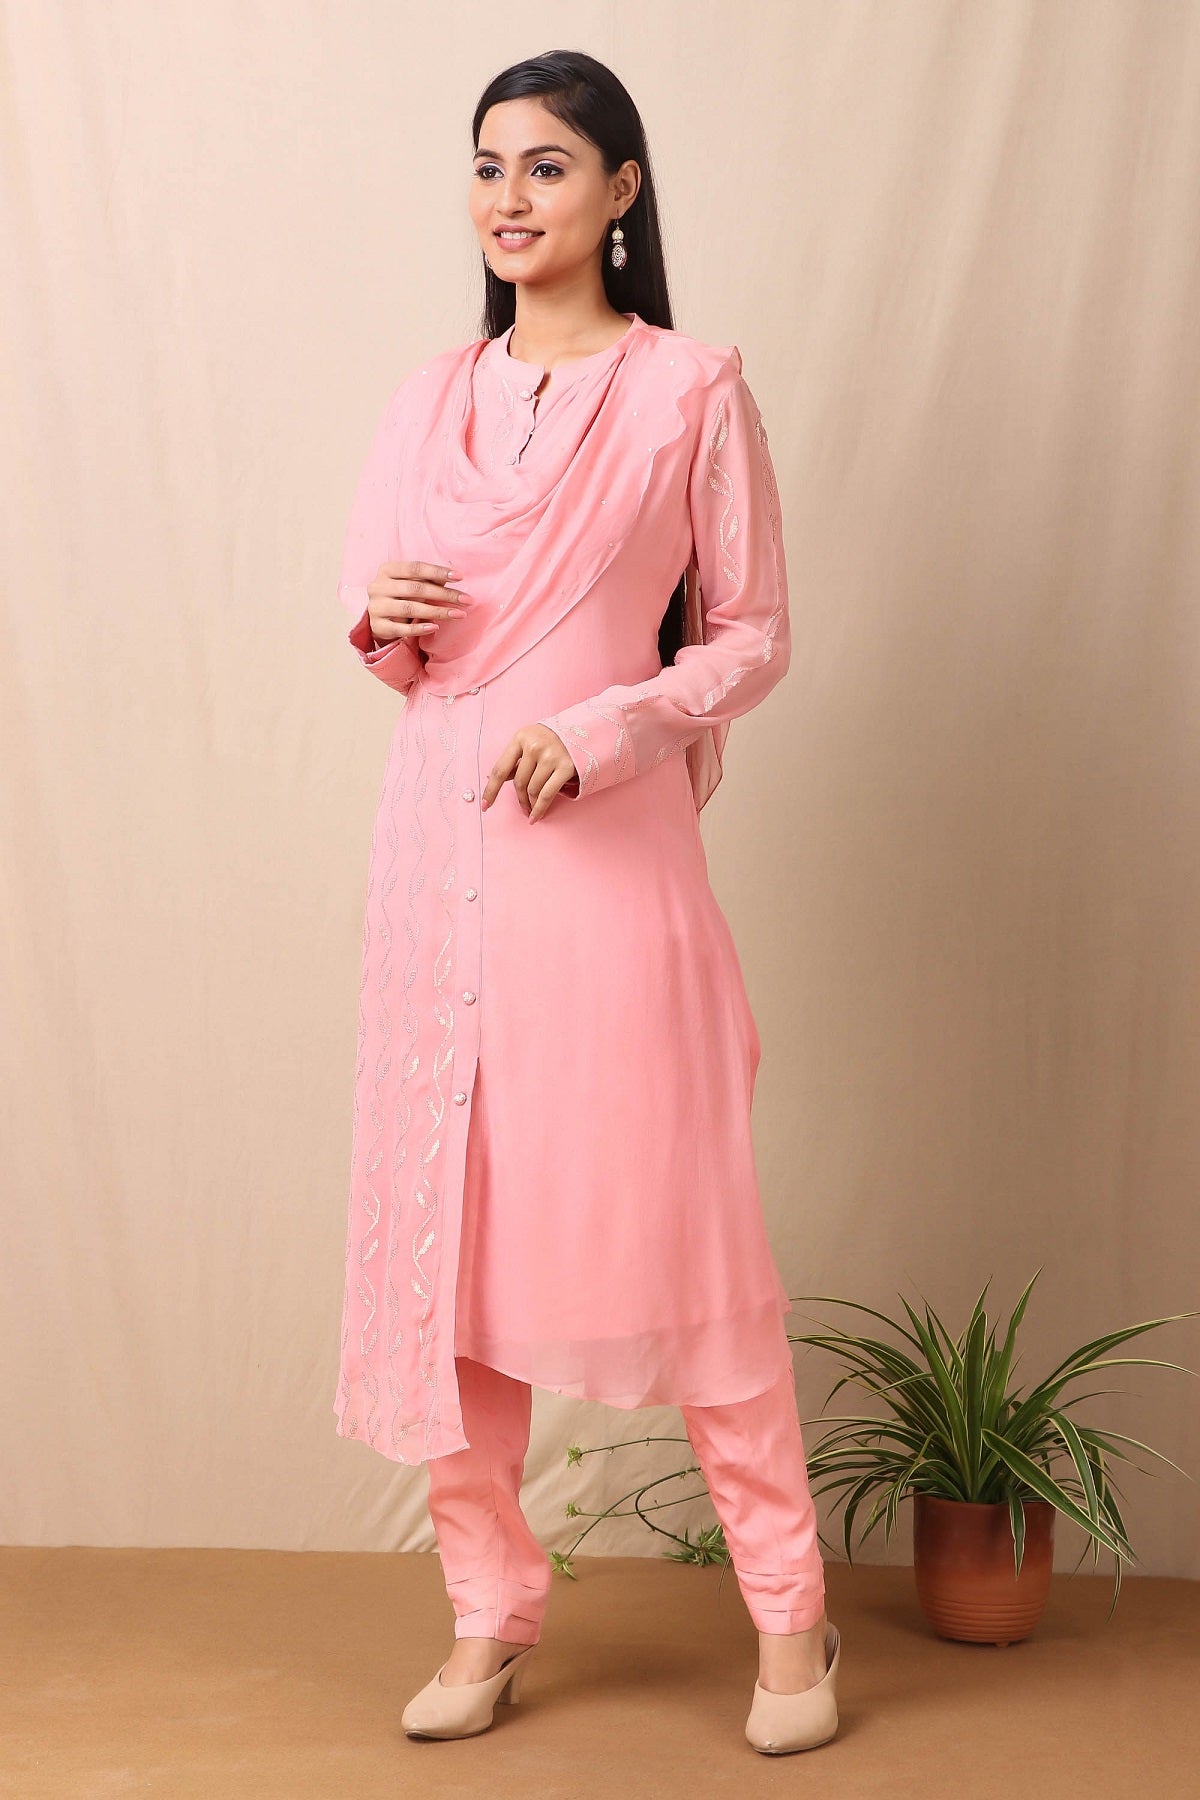 Shop beautiful set of set of  pink georgette embroidered kurta with cotton stretch pants and tabby scarf from Pure Elegance. Complete the look by wearing statement jewellery and heels. Light up your ethnic collection of clothing with this kurta and embelished with light rose gold sequin embroidery. It's woven from a fabric that's airy and uber soft against your skin. Pair it up with statement jewellery to complete your look from Pure Elegance Indian clothing store in USA online now.-Side view.